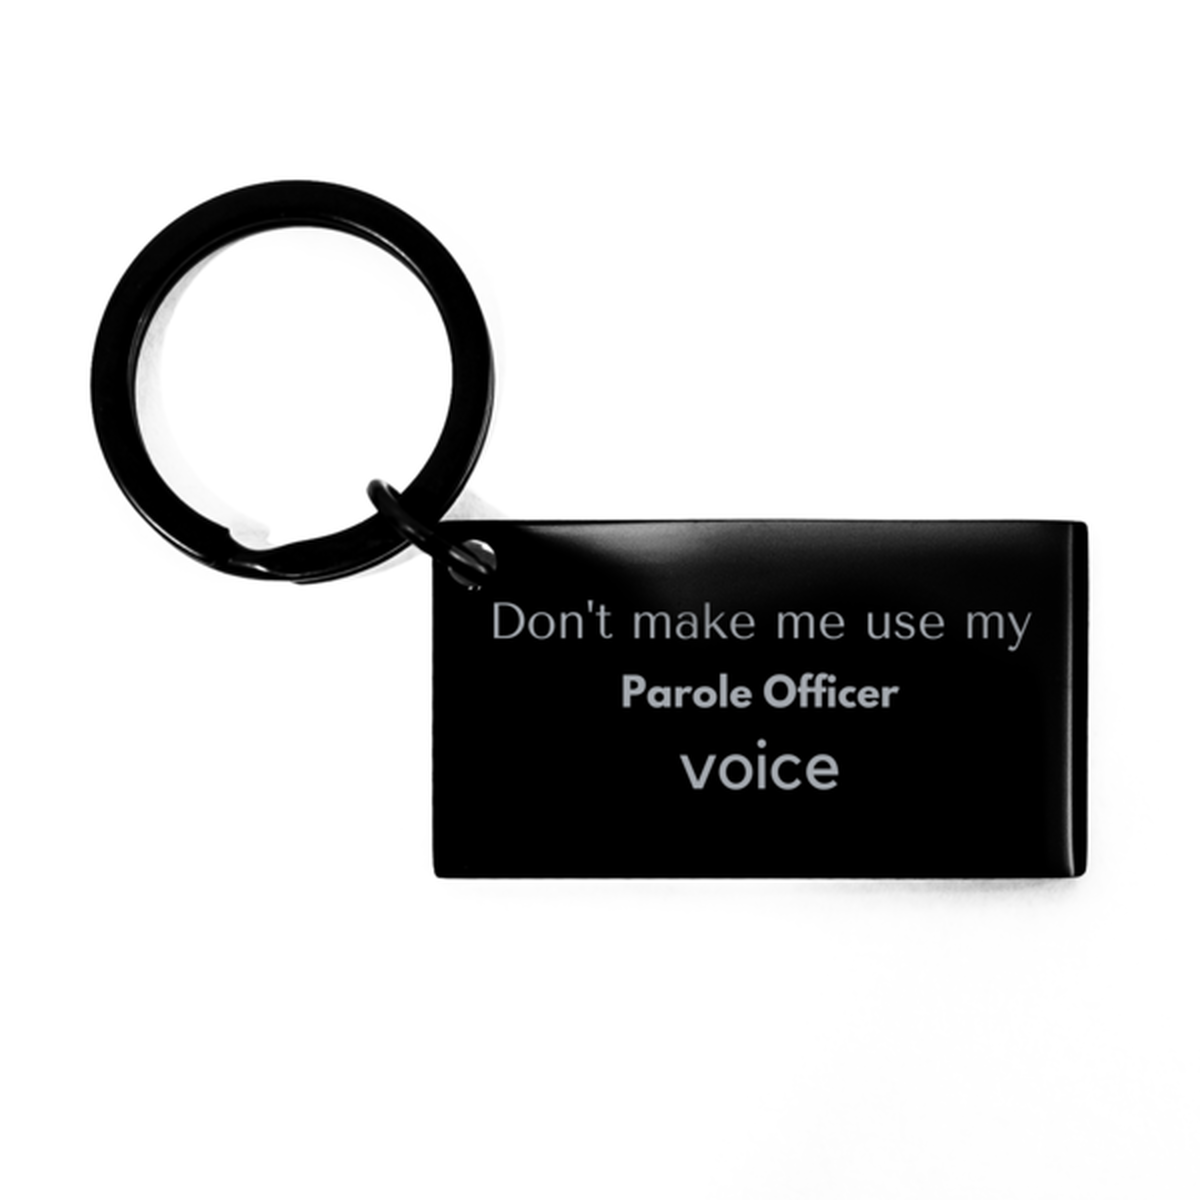 Don't make me use my Parole Officer voice, Sarcasm Parole Officer Gifts, Christmas Parole Officer Keychain Birthday Unique Gifts For Parole Officer Coworkers, Men, Women, Colleague, Friends